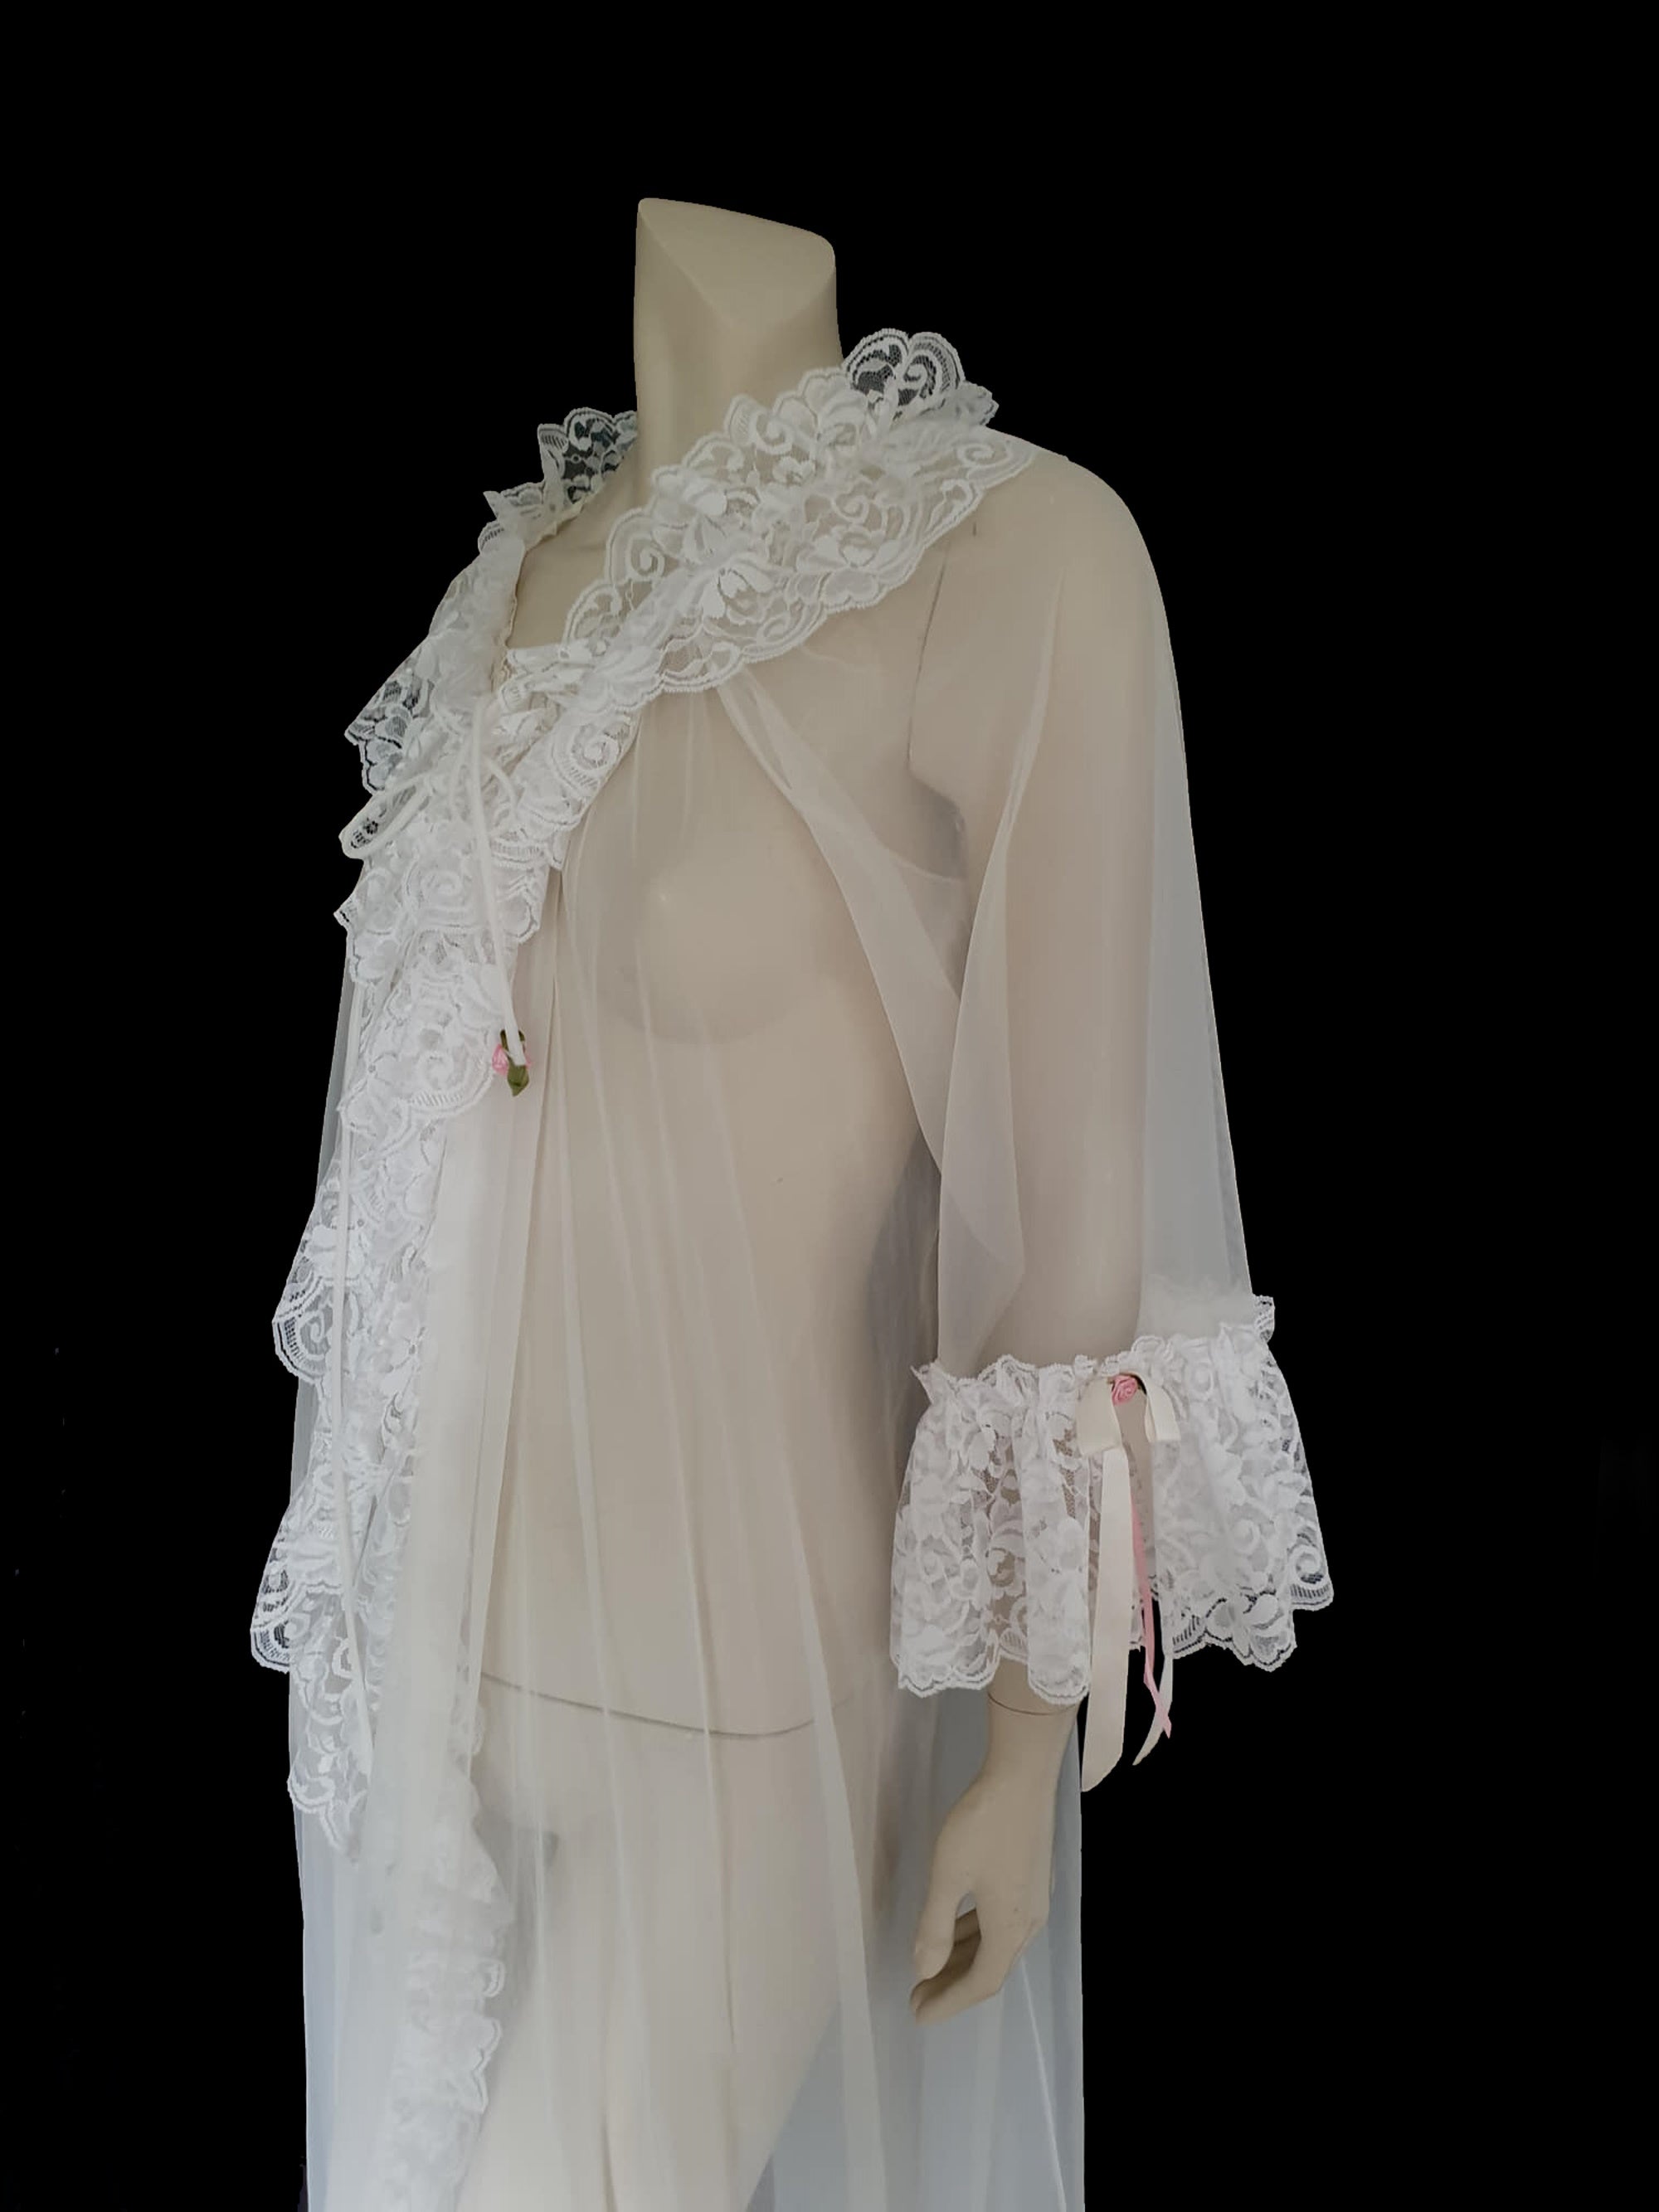 Sheer White Lacy Peignoir With Ribbon Rosettes - M